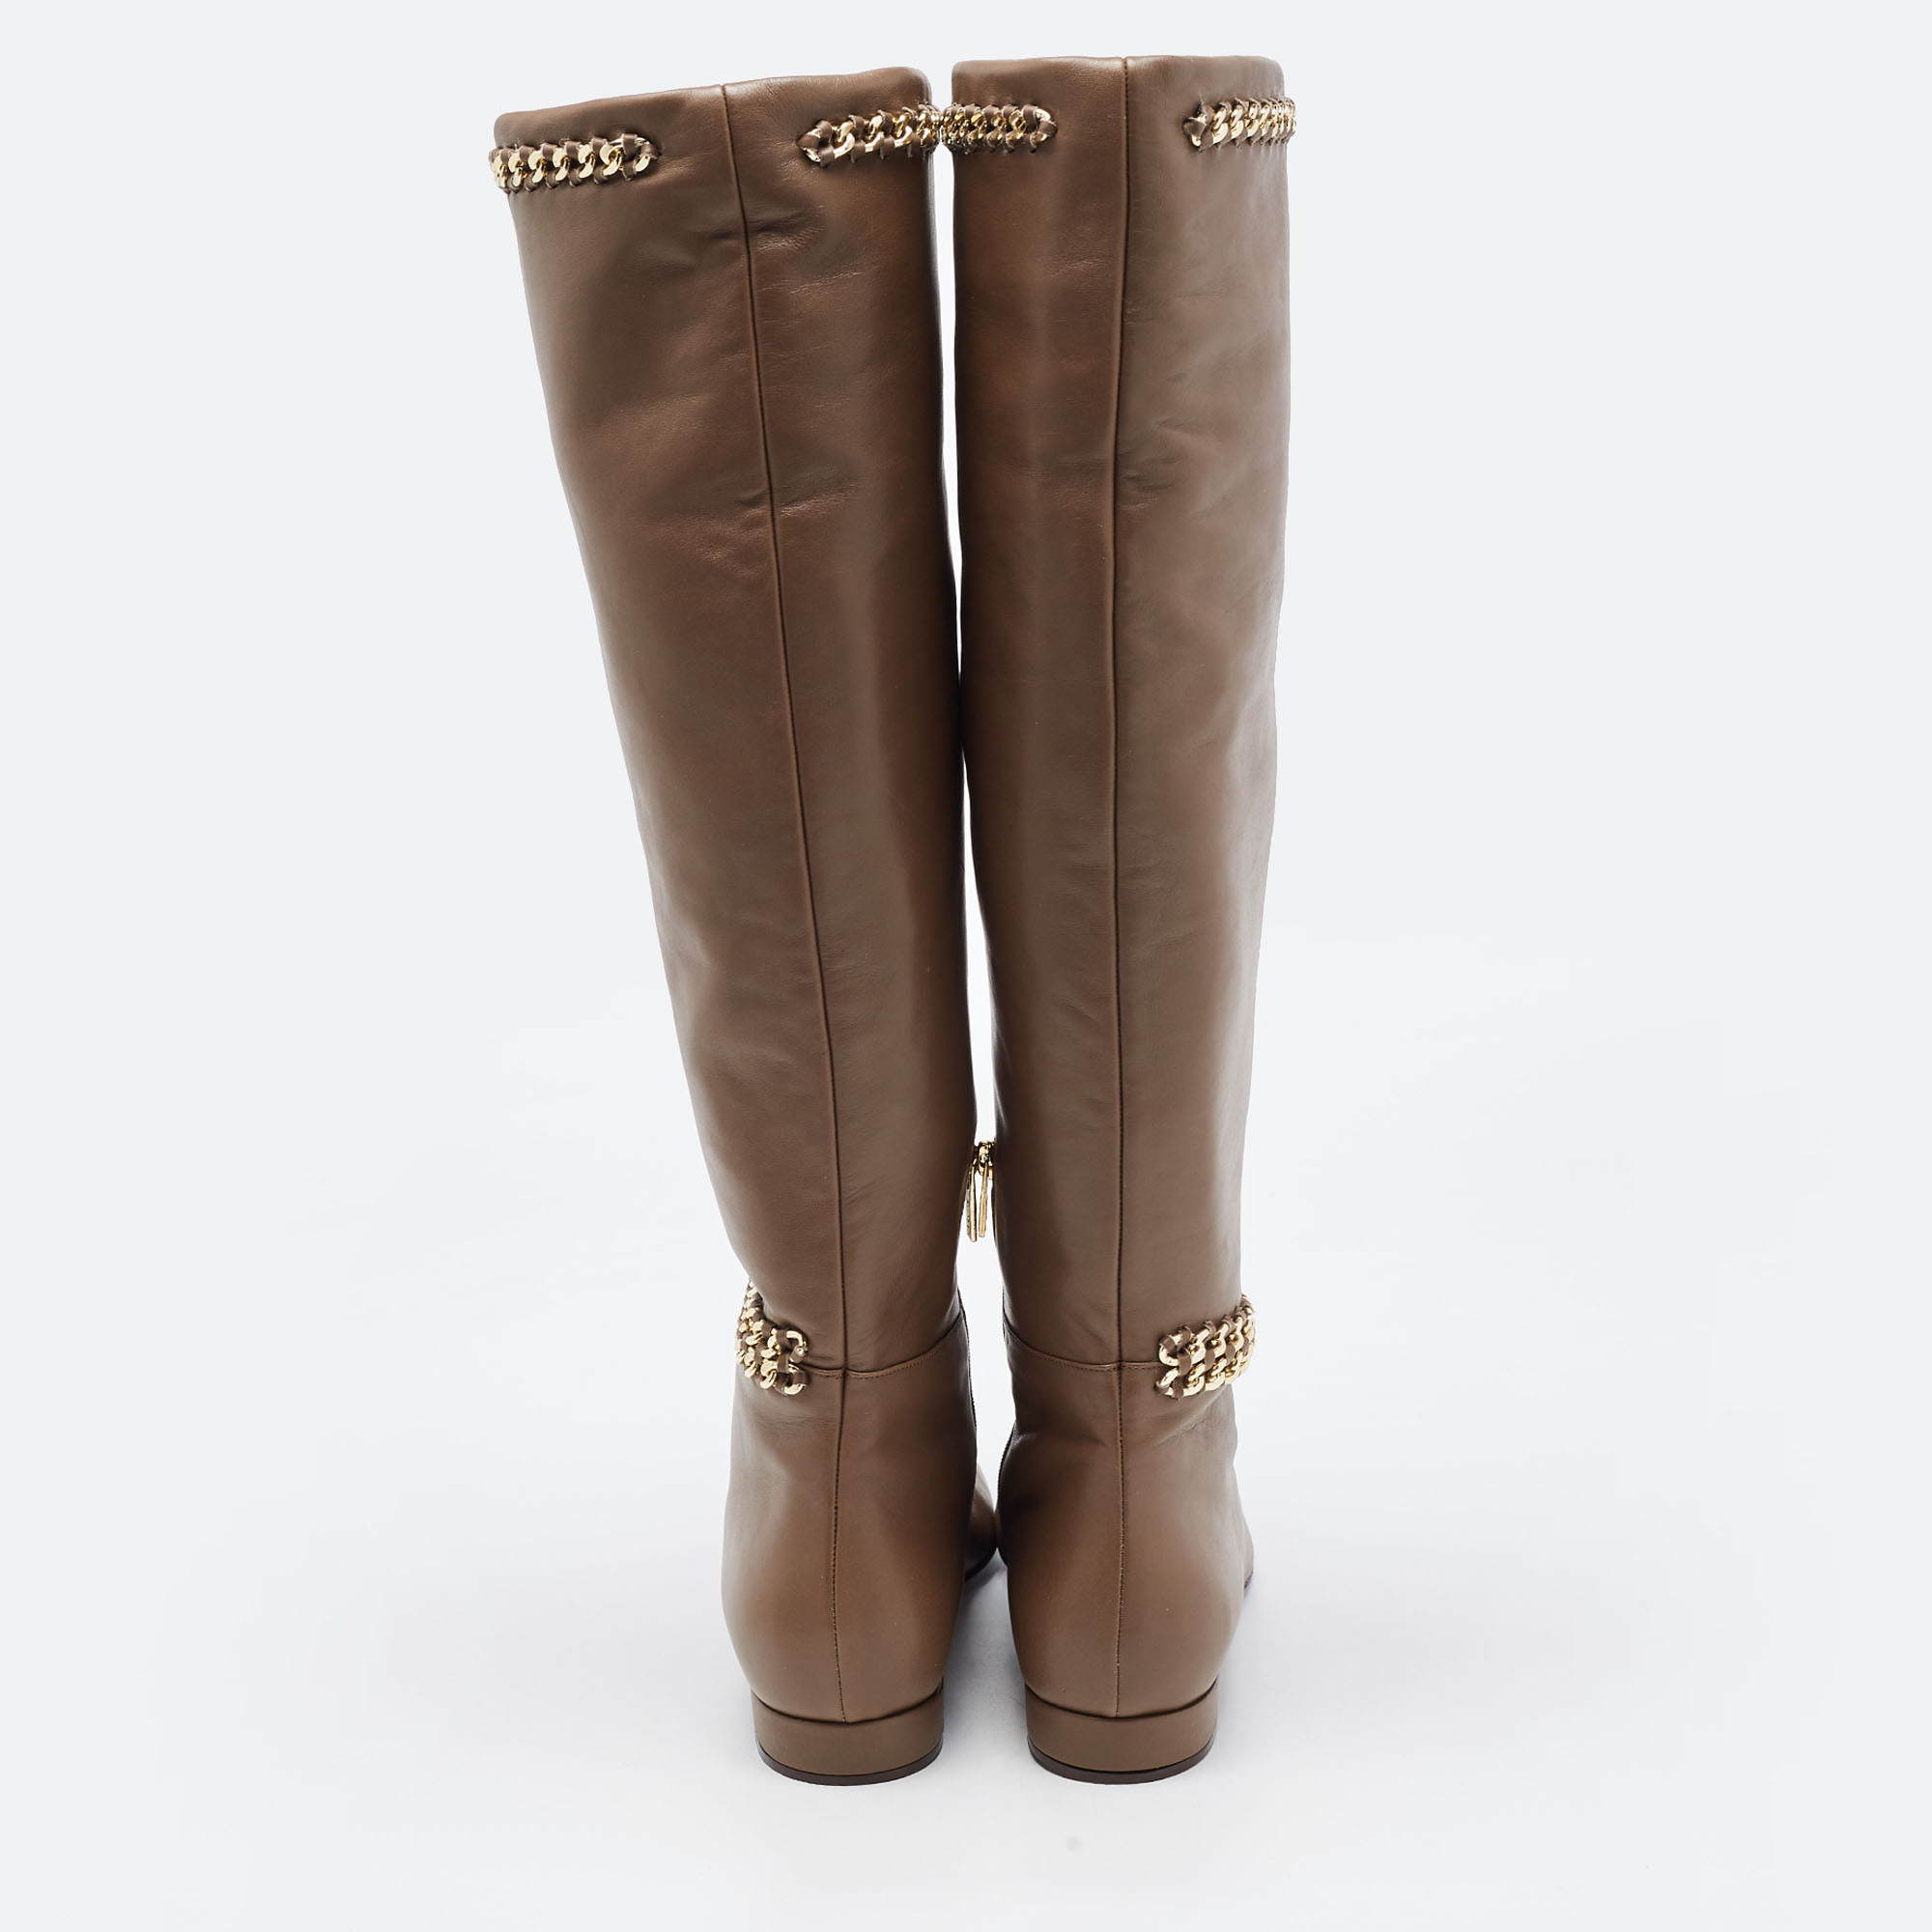 Le Silla Brown Leather Chain Detail Knee Length Boots Size 37.5